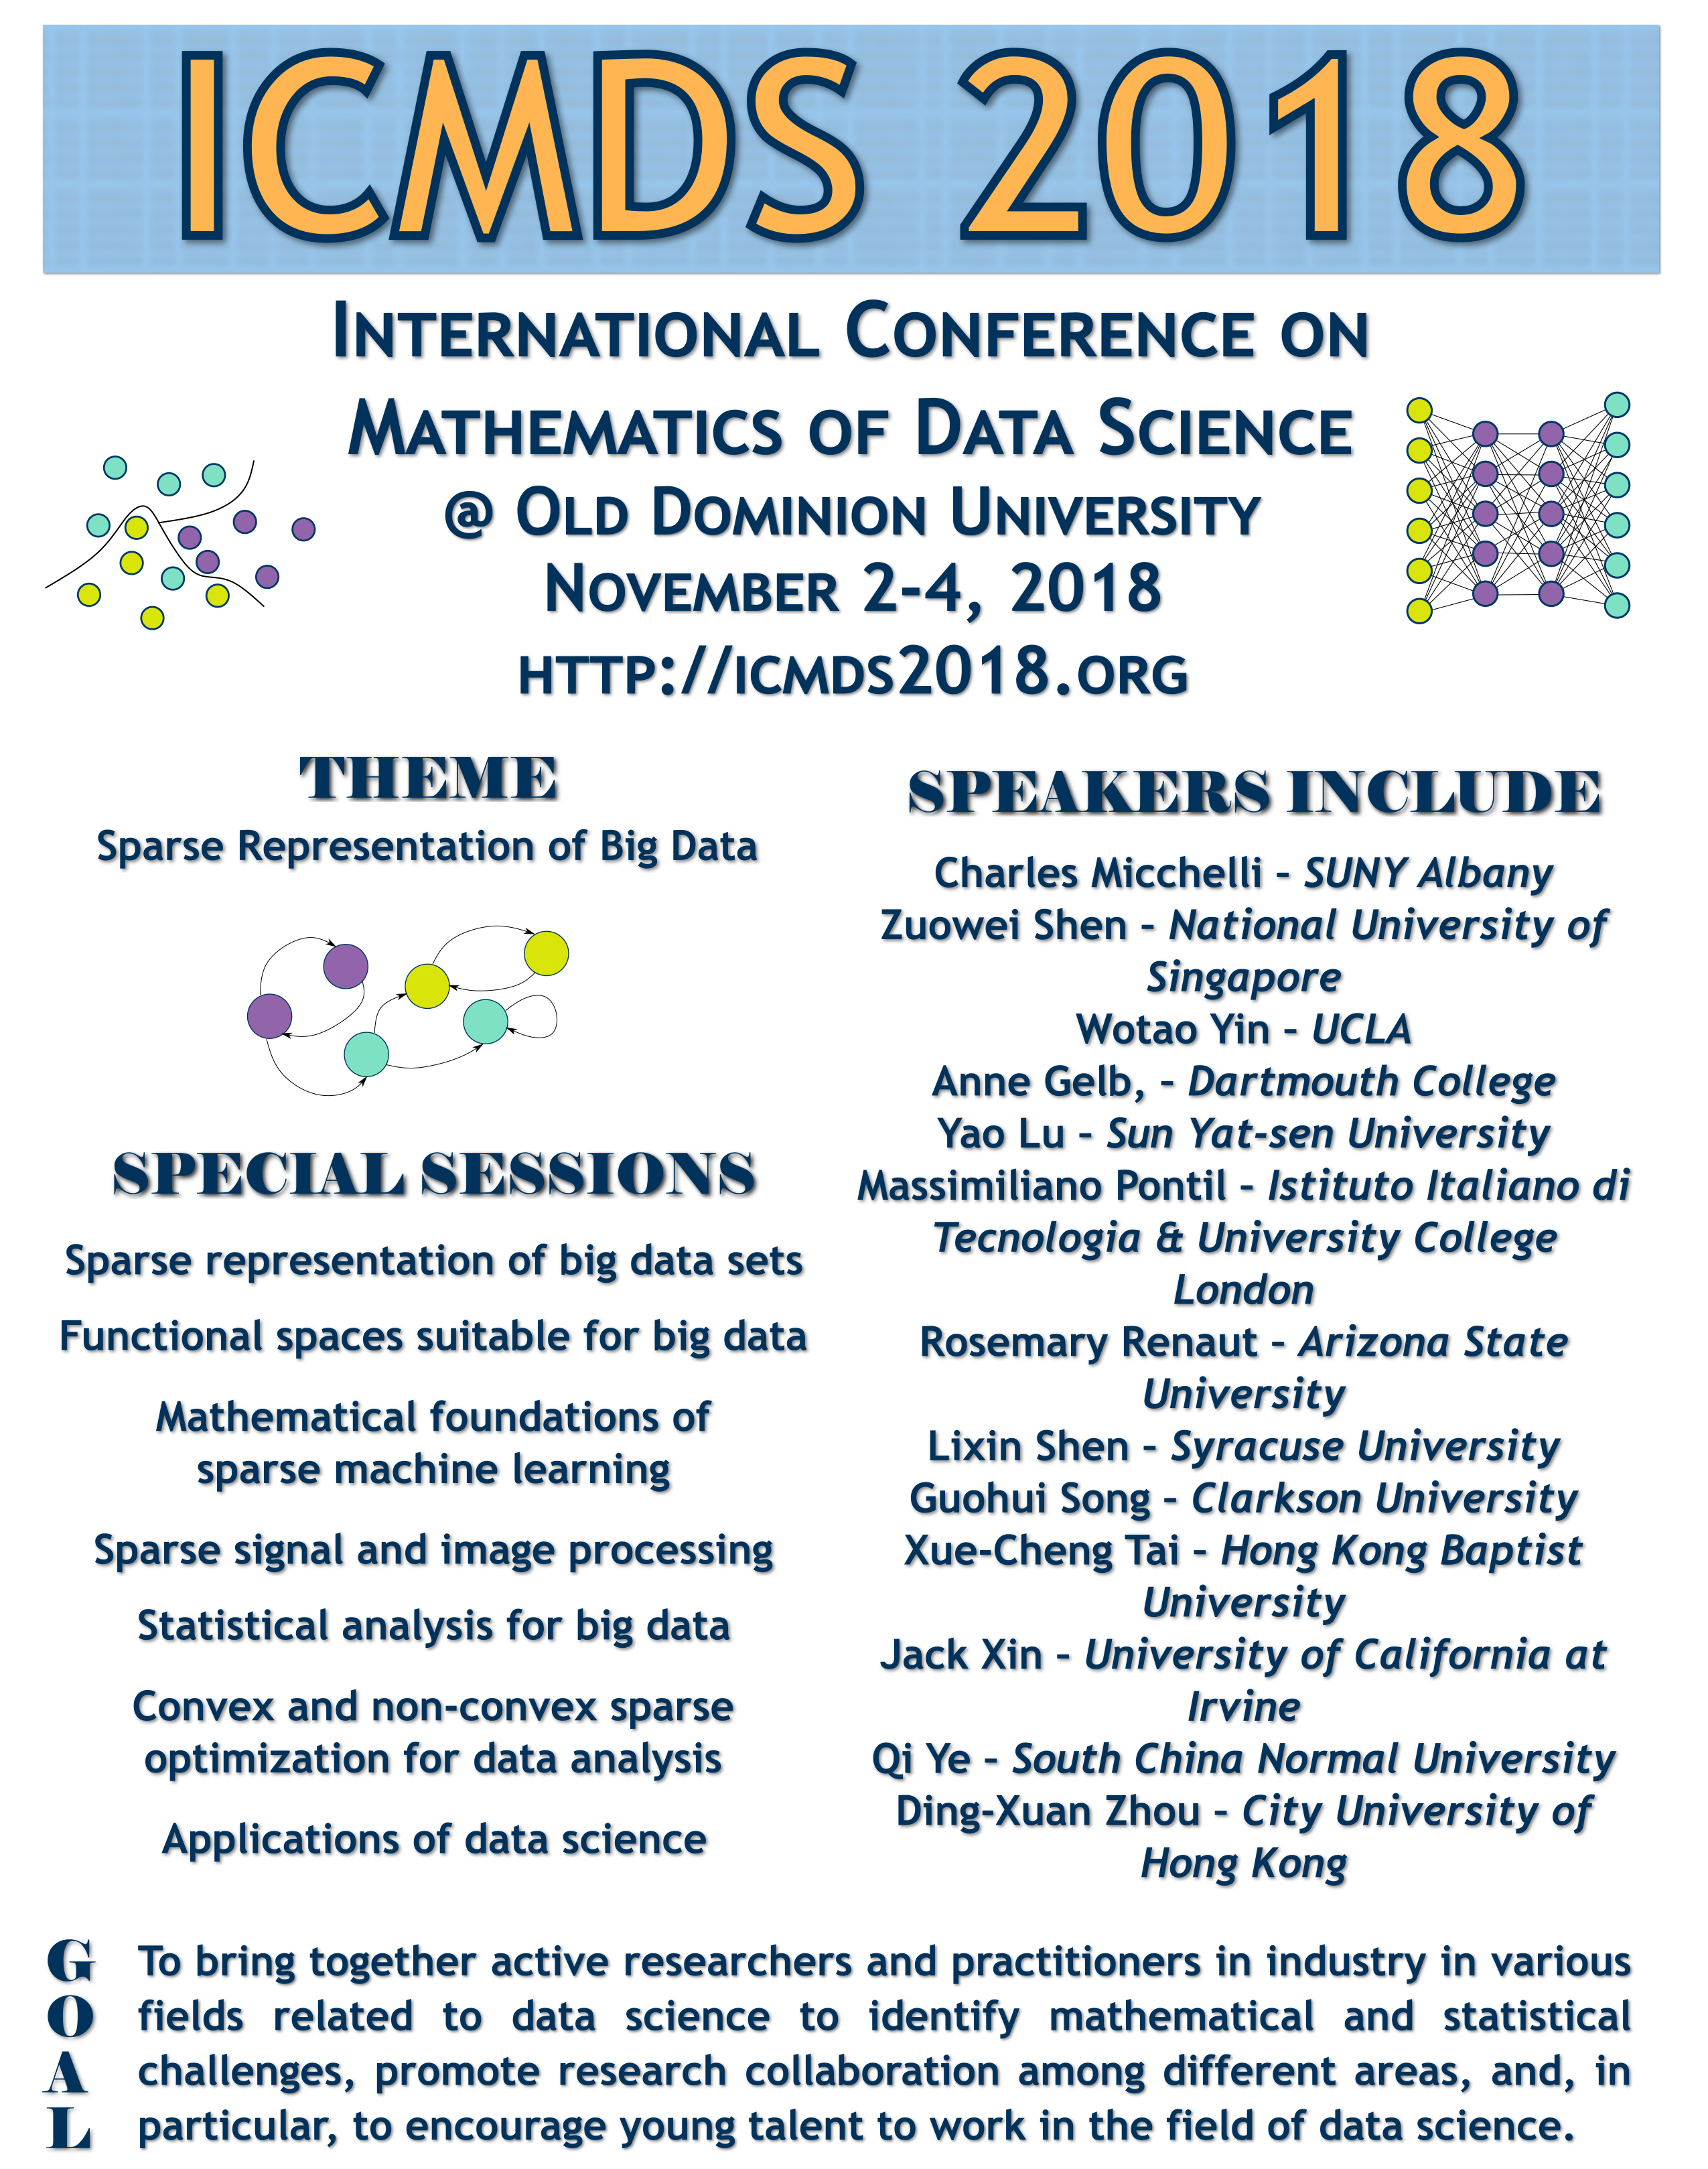 International Conference on Mathematics of Data Science Flyer